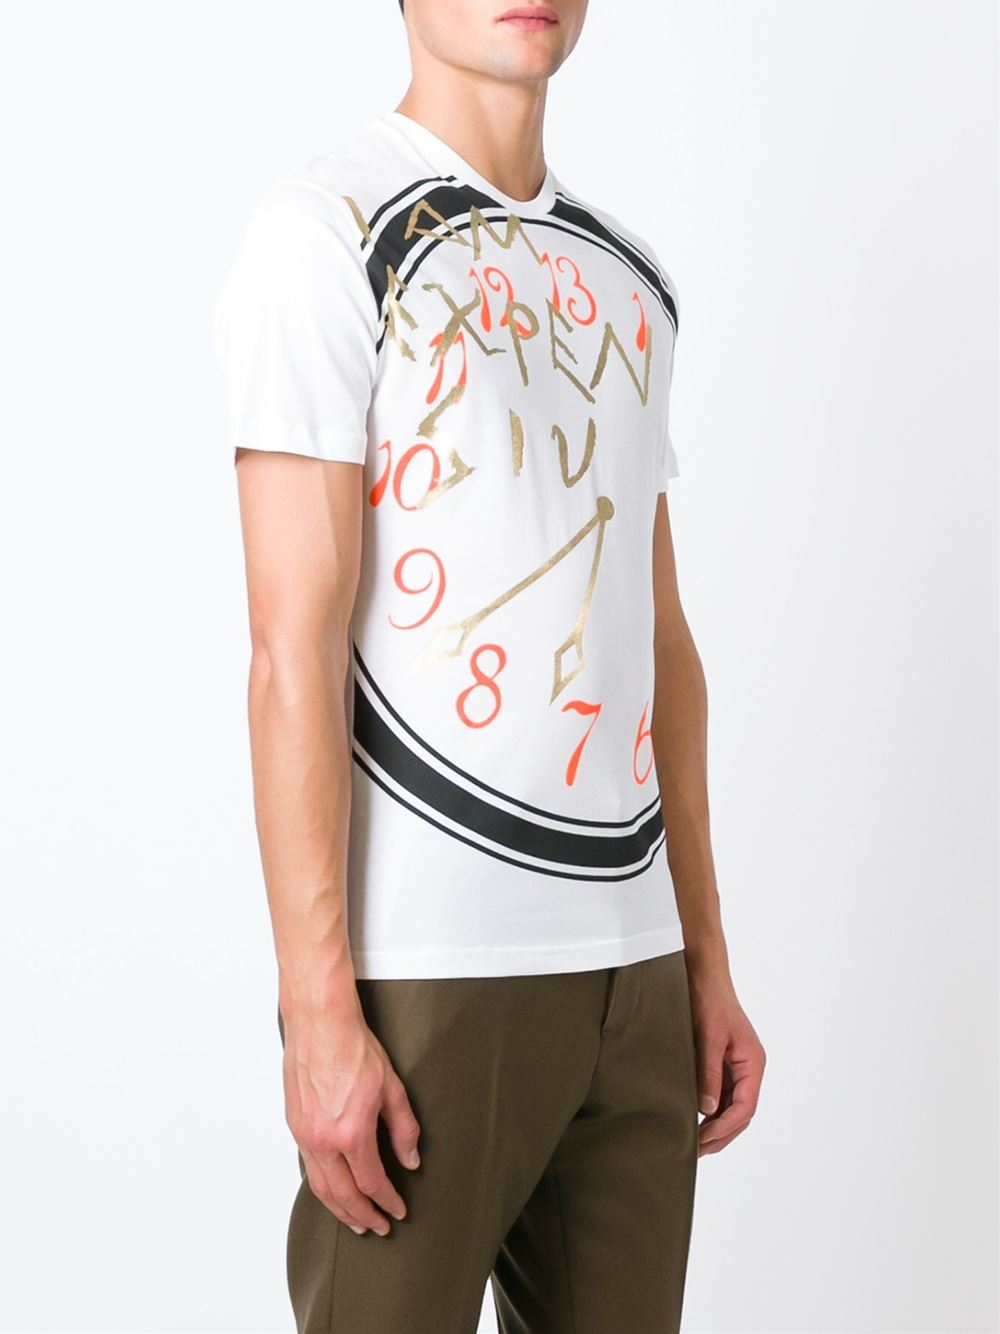 Vivienne Westwood 'i Am Expensive' T-shirt in White for Men - Lyst